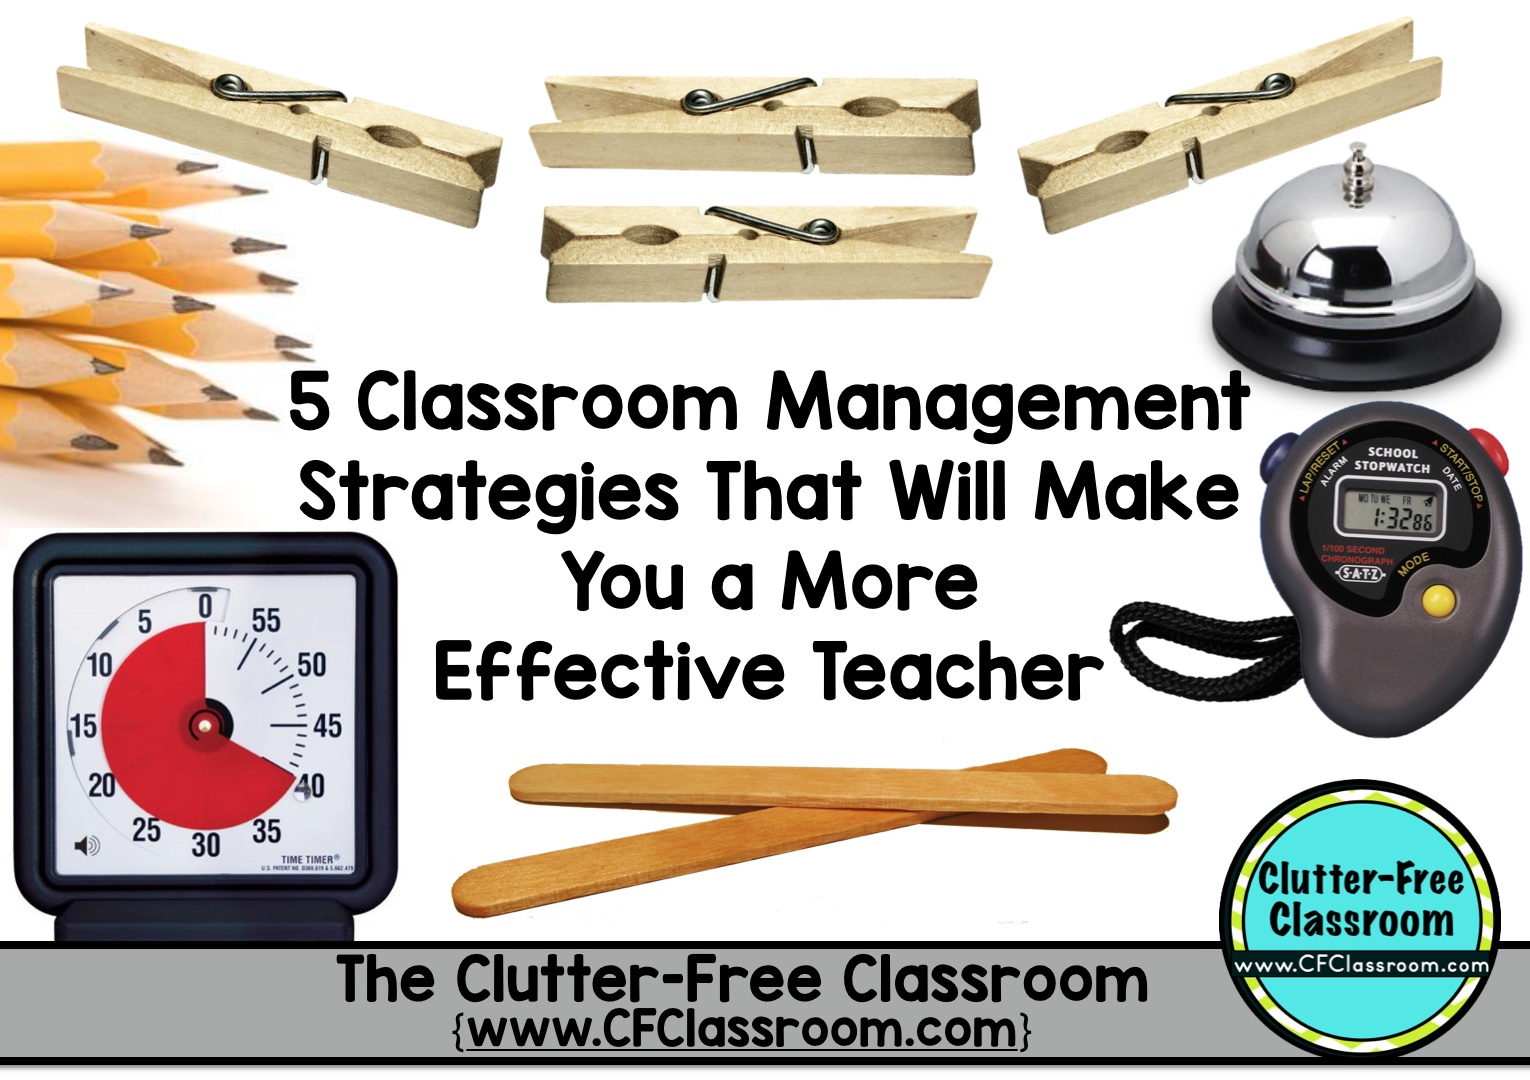 Do you want to be a highly-effective teacher? Classroom management is the key to success in the classroom. This post shares 5 easy classroom management strategies to improve your classroom management skills.